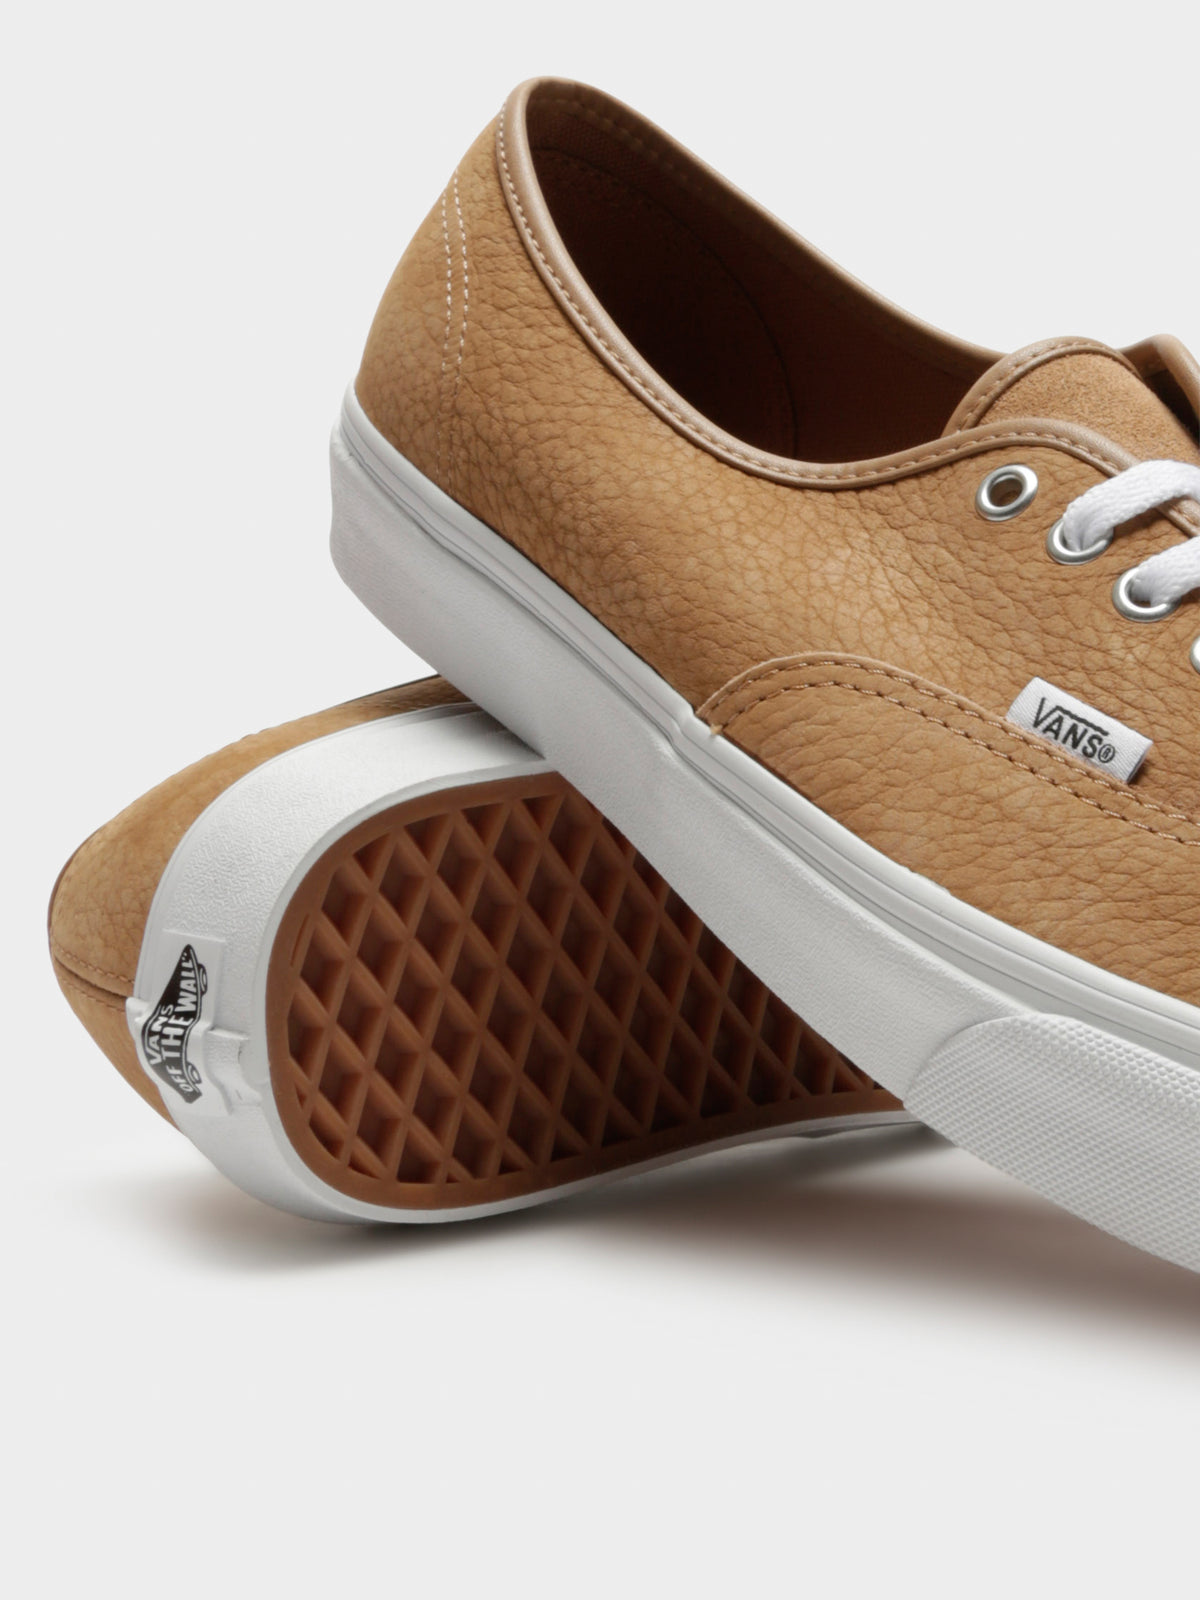 Mens Authentic Sneakers in Grain Leather Camel